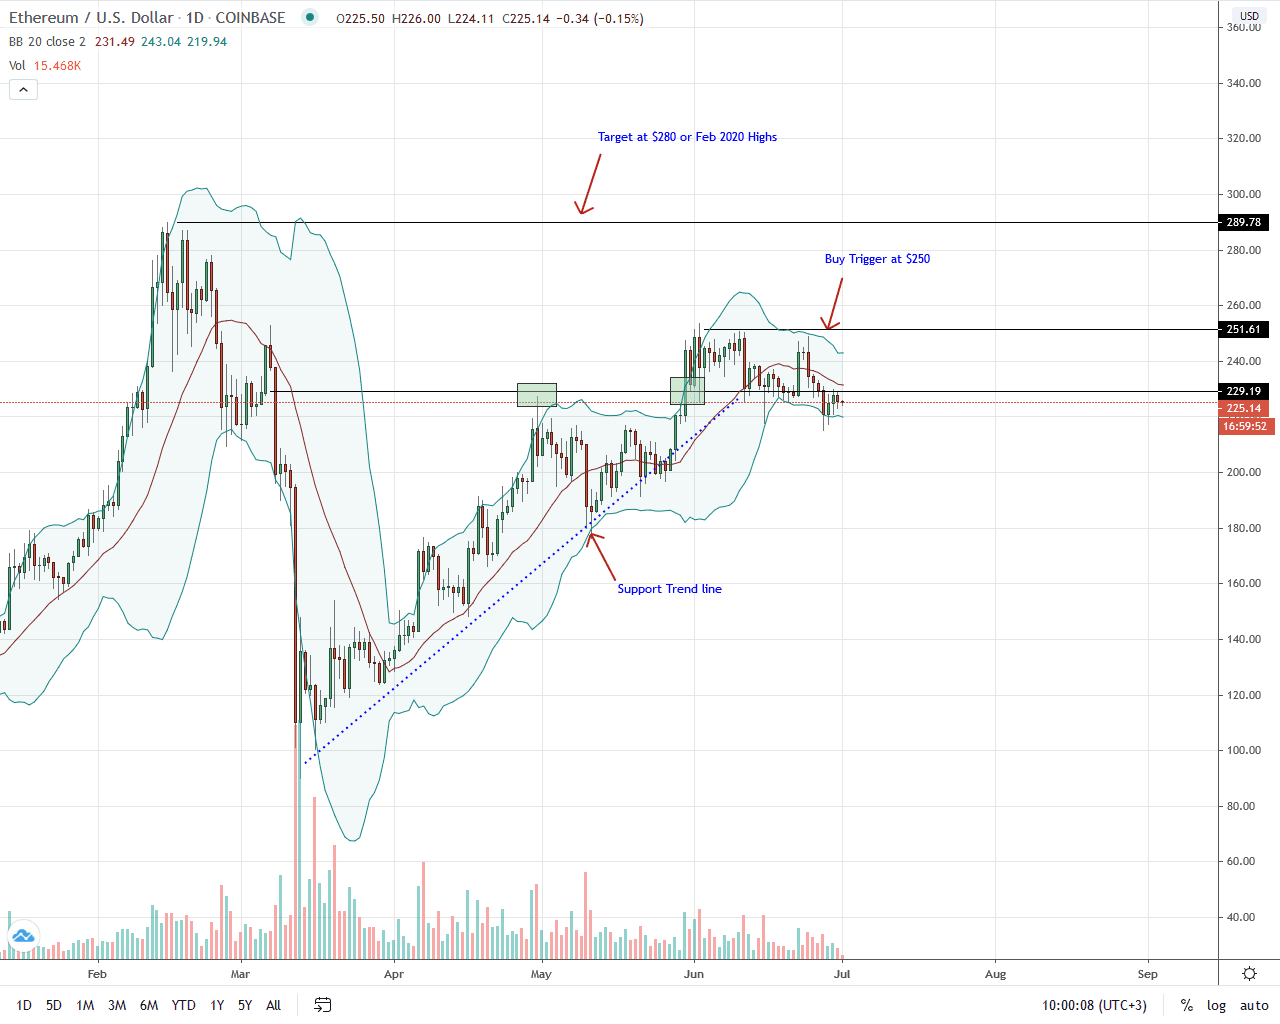 Ethereum Daily Chart for July 1, 2020